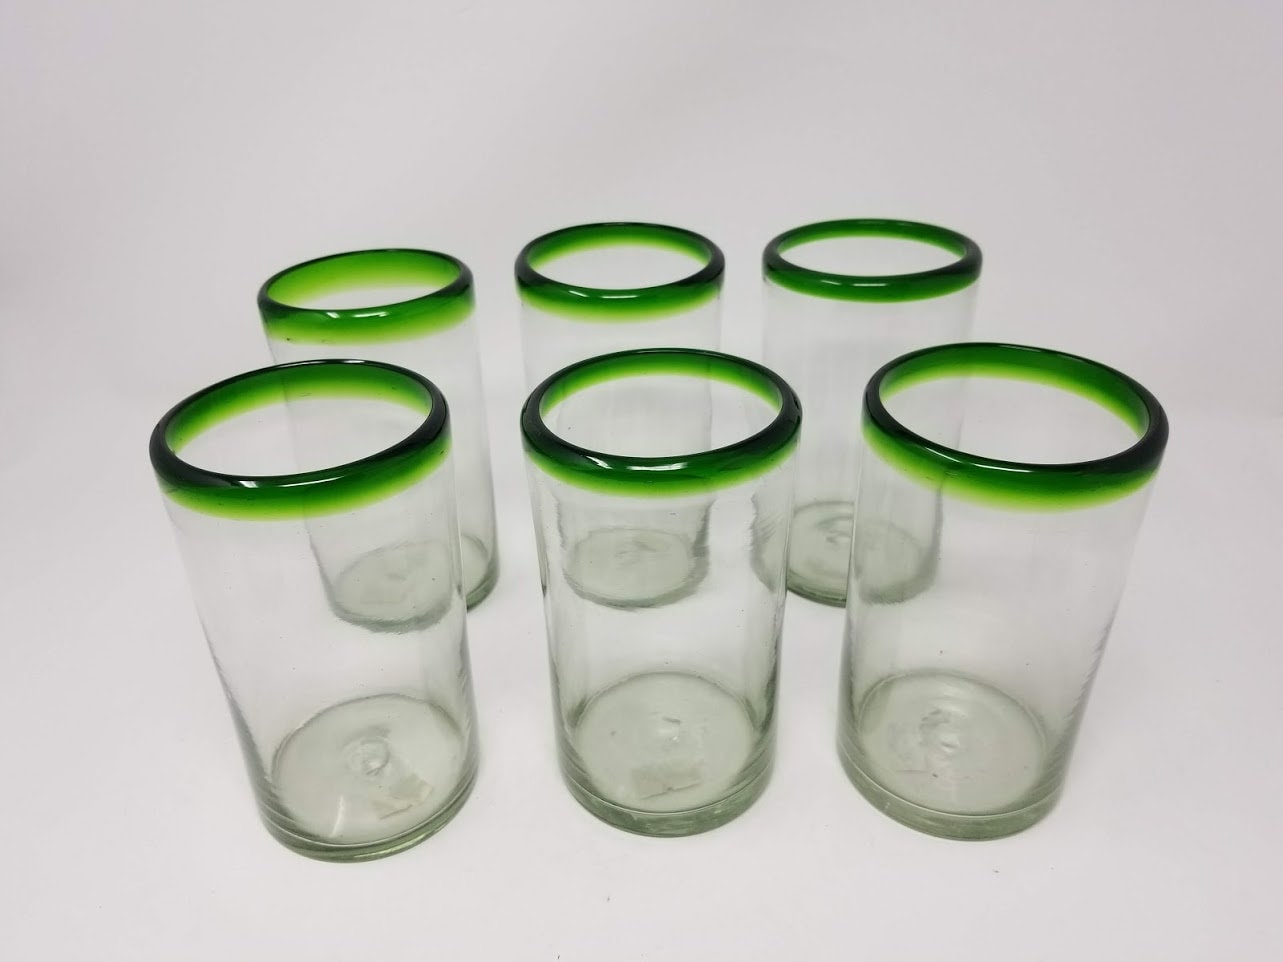 Handblown Glass Clear and Green Water Glasses Set of 6 - Conical